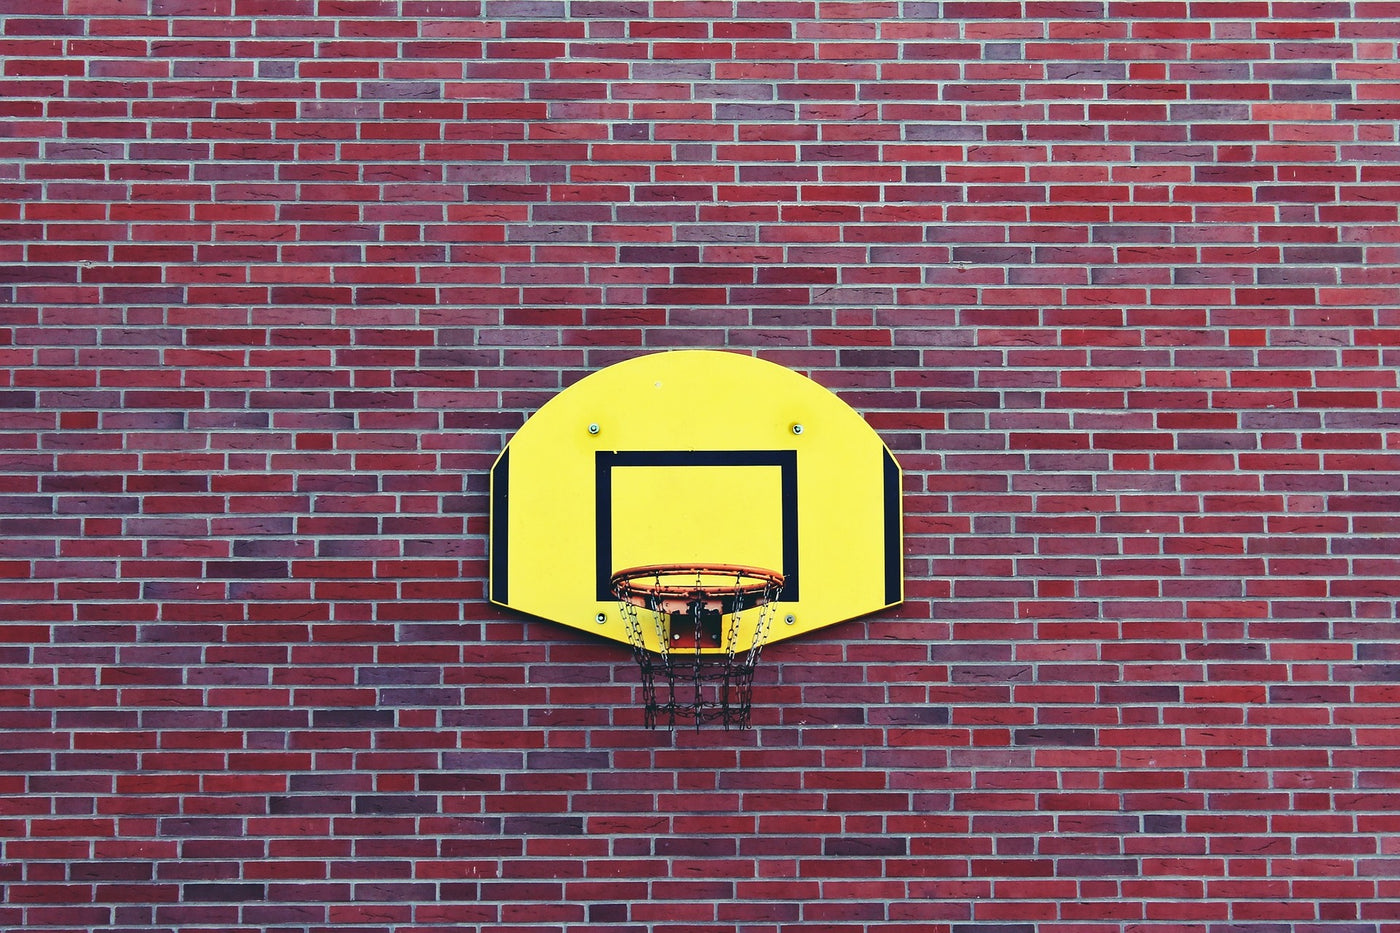 Factors to Know Before Installing a Wall-Mounted Basketball Hoop